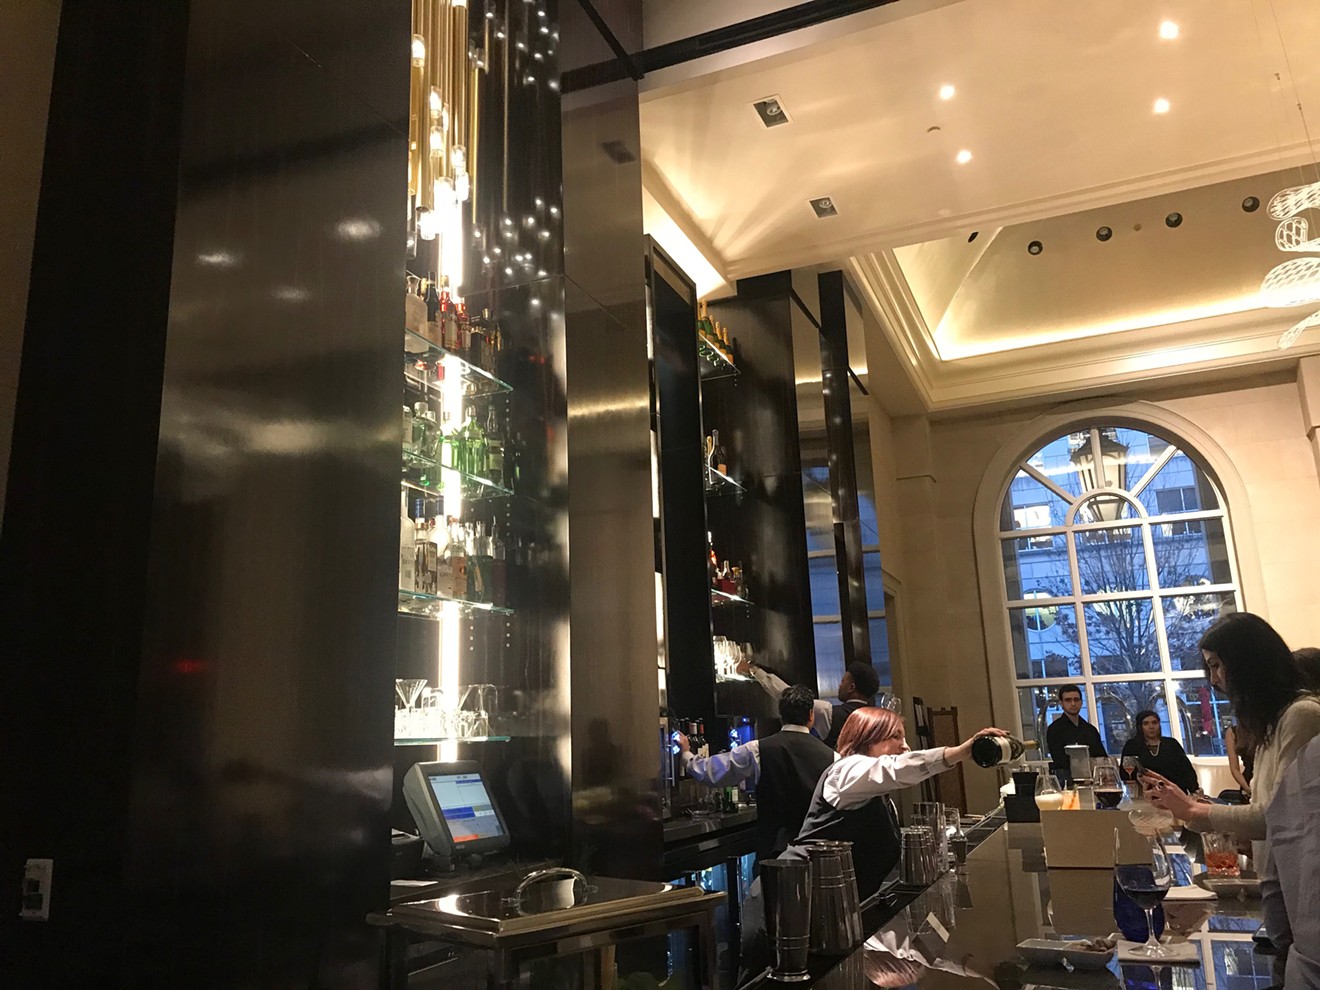 As part of the Crescent's recent $30 million renovation, it recently opened Beau Nash, a lobby Champagne bar that pays homage to a restaurant of the same name that operated at the Uptown hotel from 1986 to 2004.